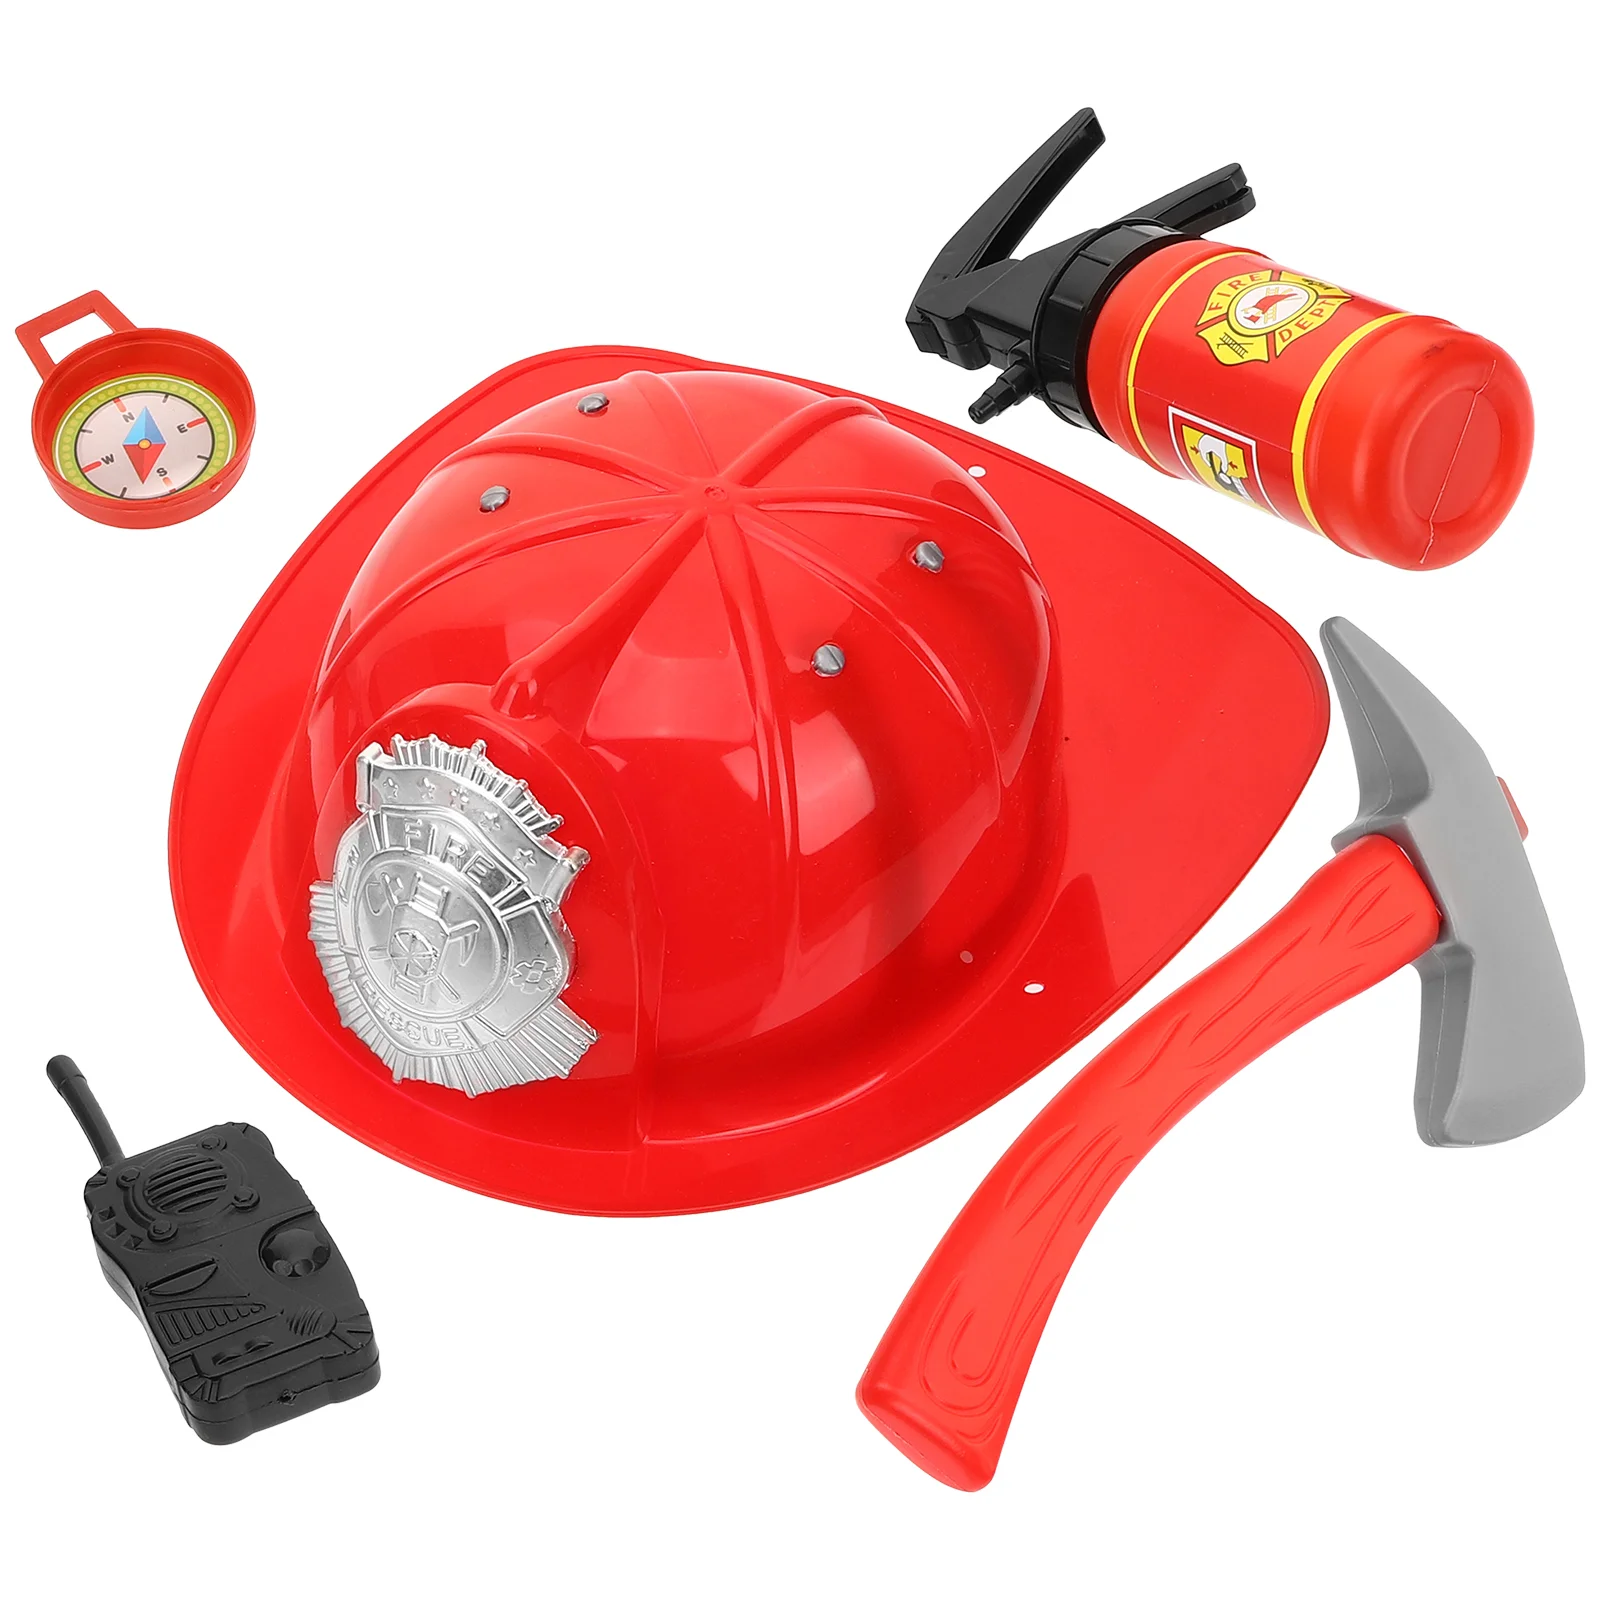 

Police Costume Dress Up Kids Firemen Play Role Fireman Hat Fire 3 Toddlers Activities Airplane Policeman Kit Firefighter Toys